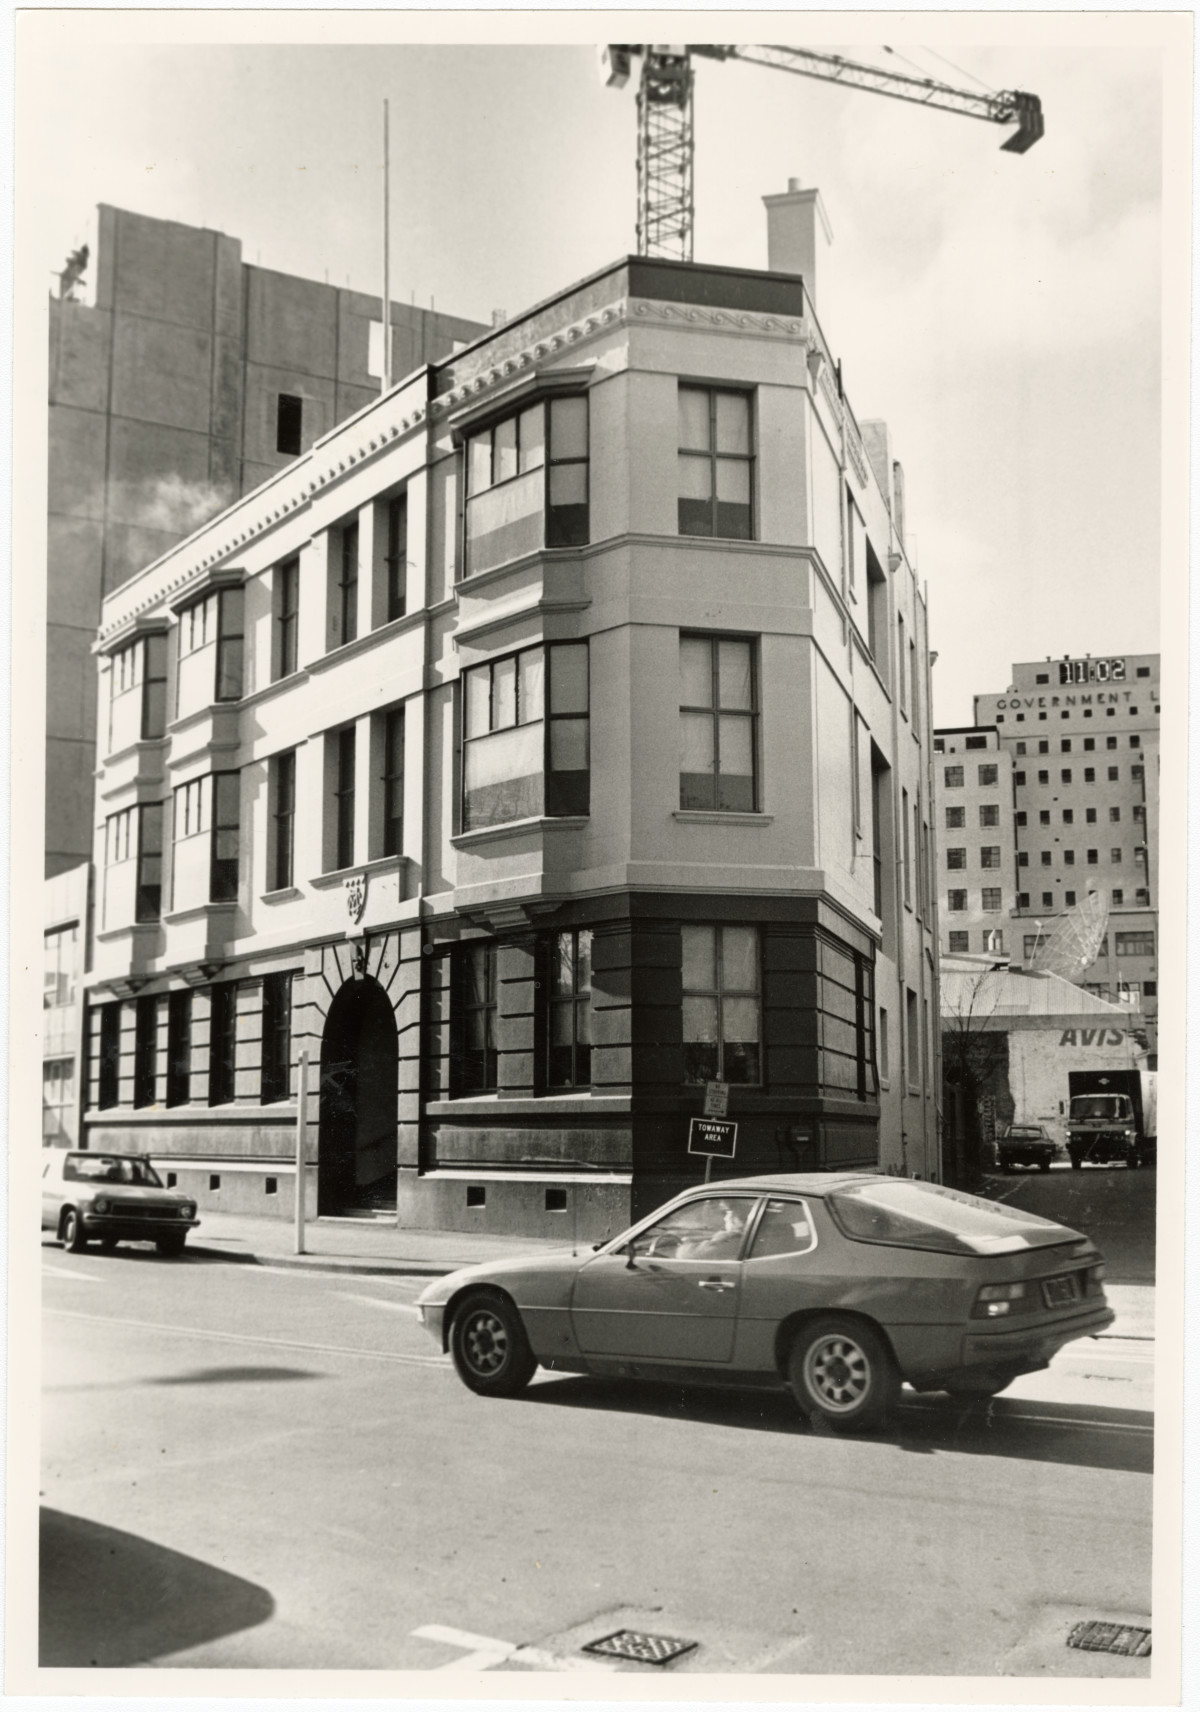 The Midland Club on Oxford Terrace. 1988. Christchurch Star archive. In copyright. CCL-StarP-03239A